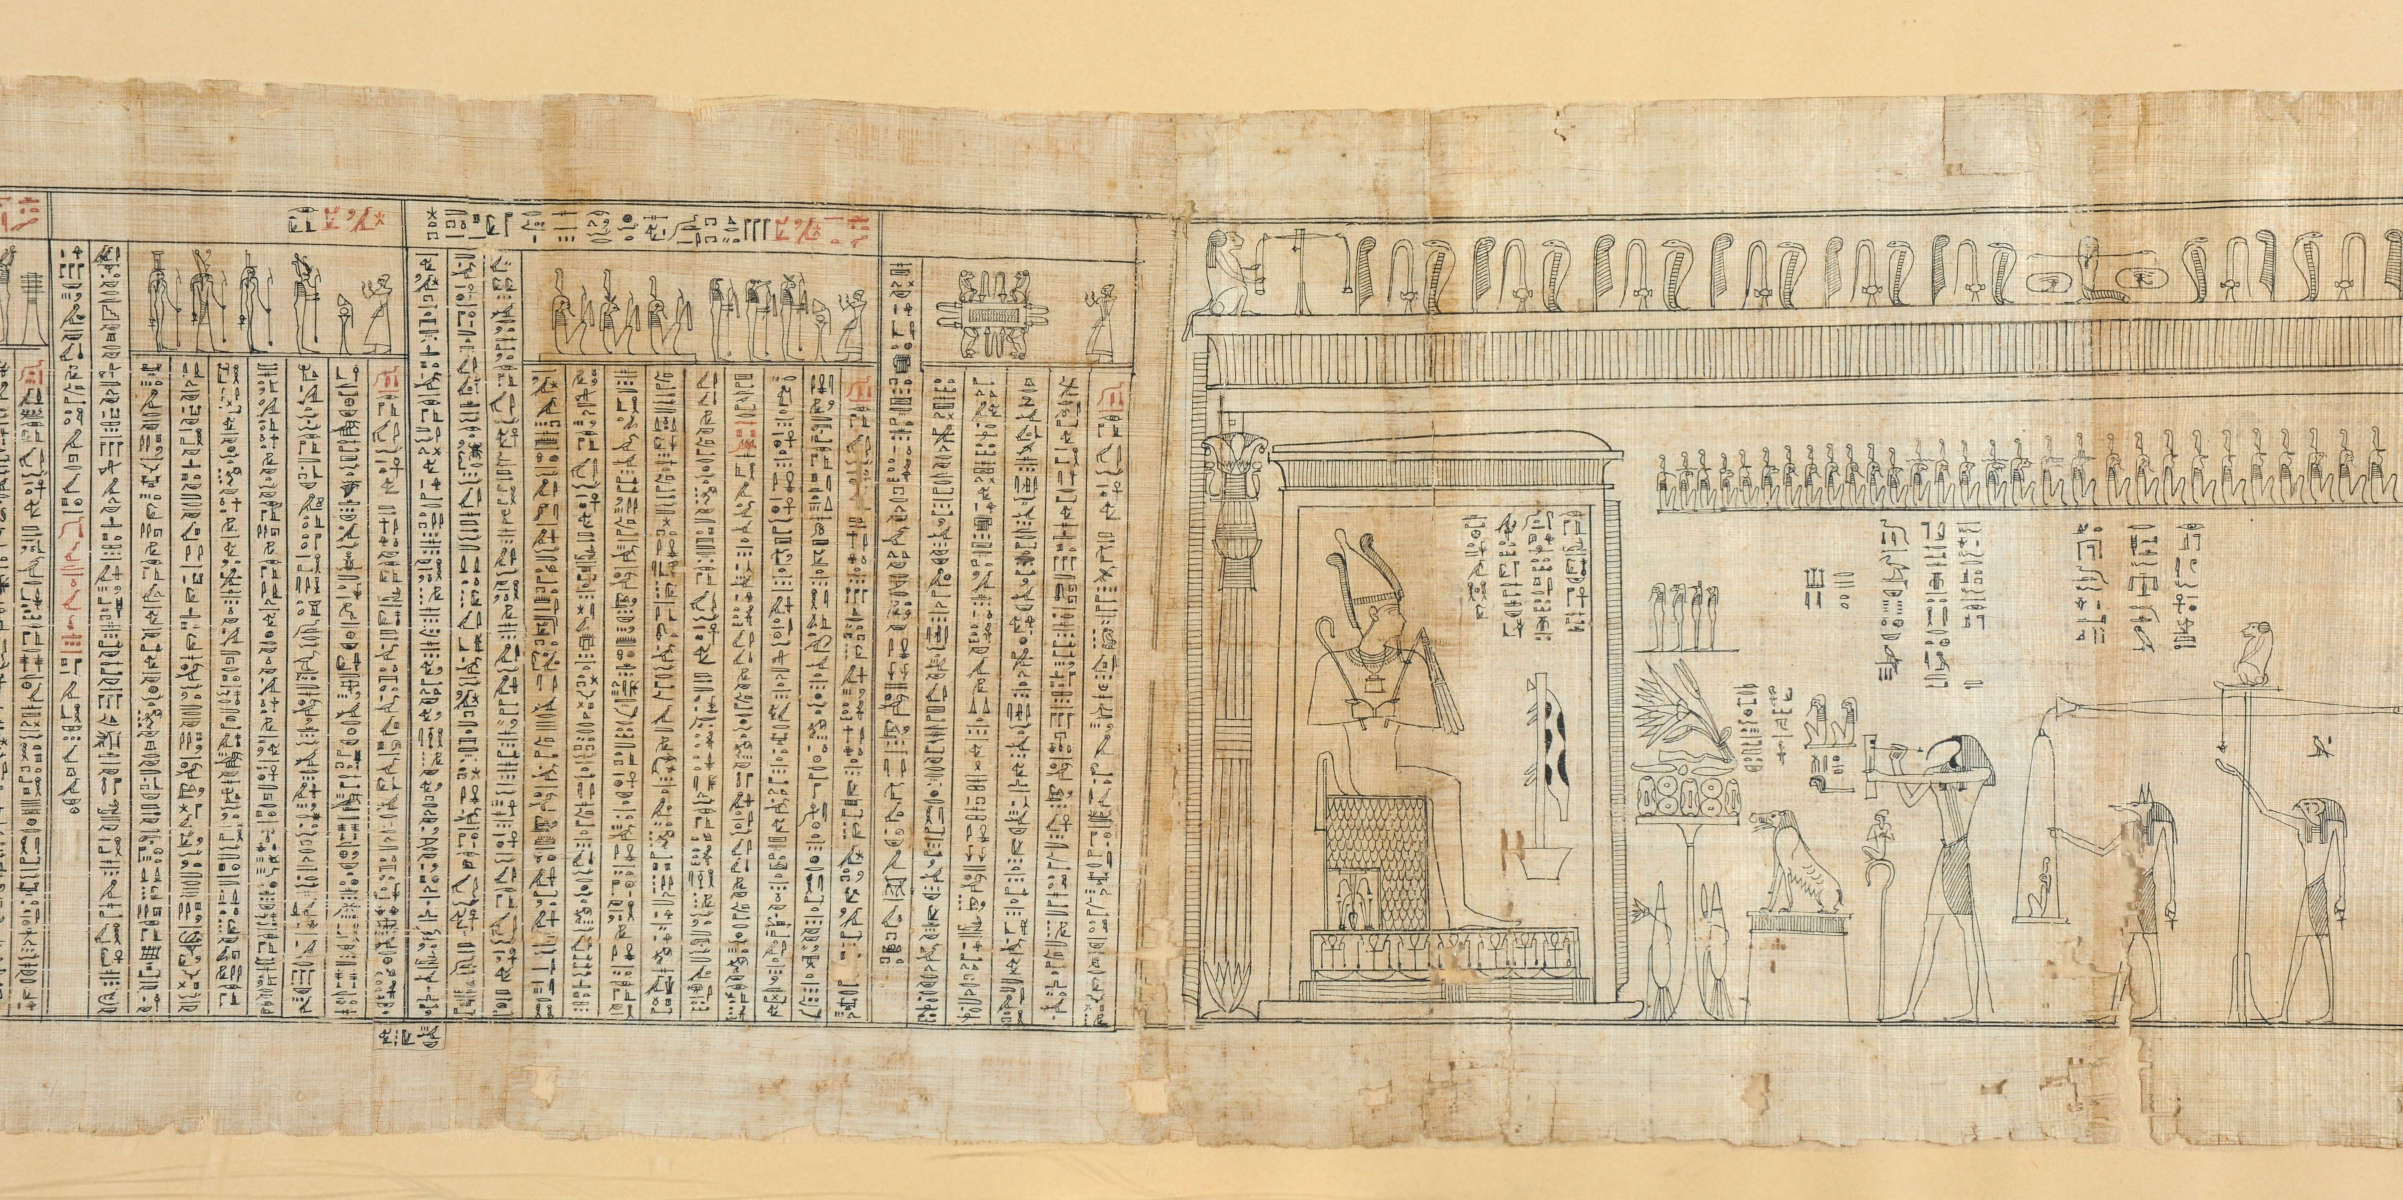 The Book of the Dead of Iuefankh